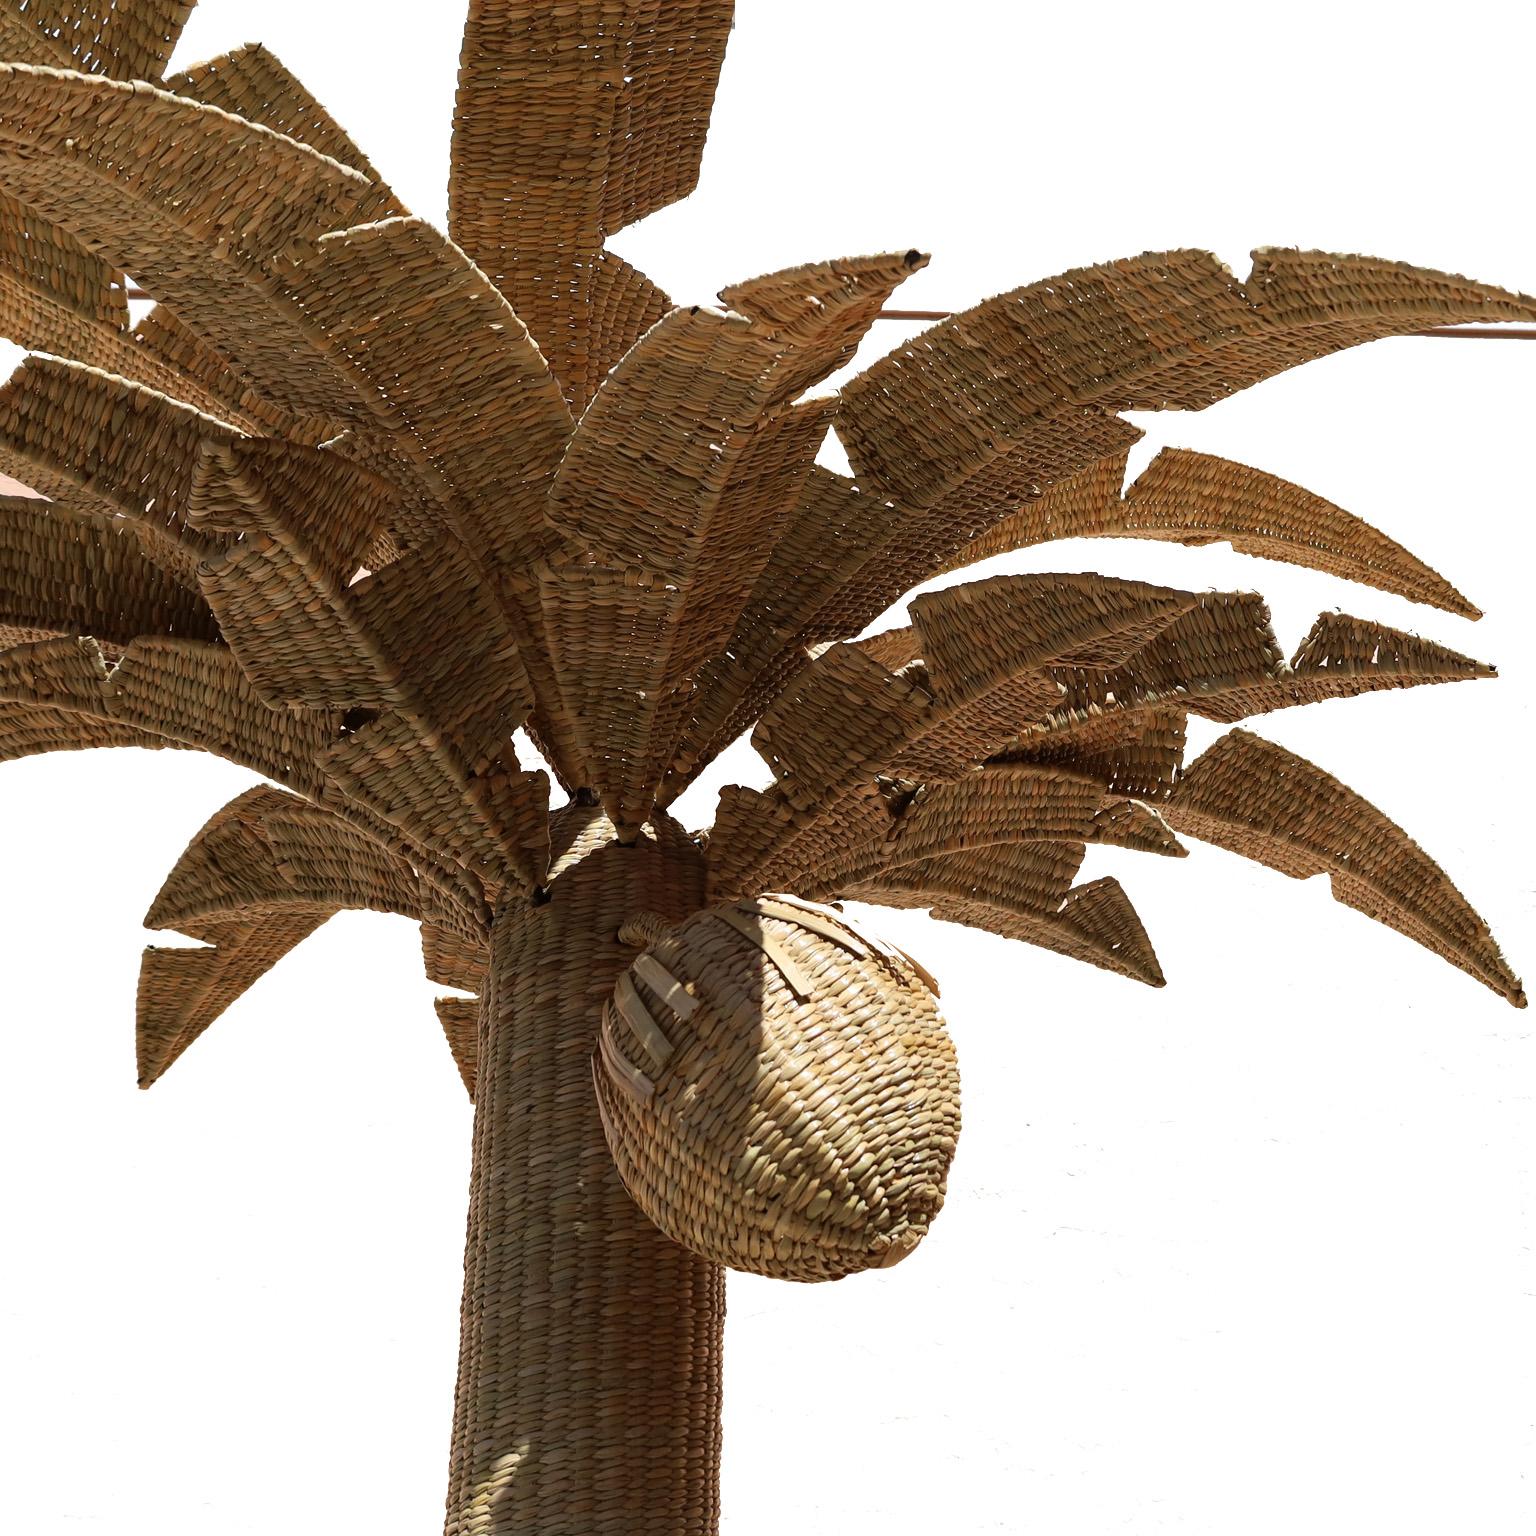 Life Size Wicker Palm Tree Sculpture from the FS Flores Collection For Sale 3